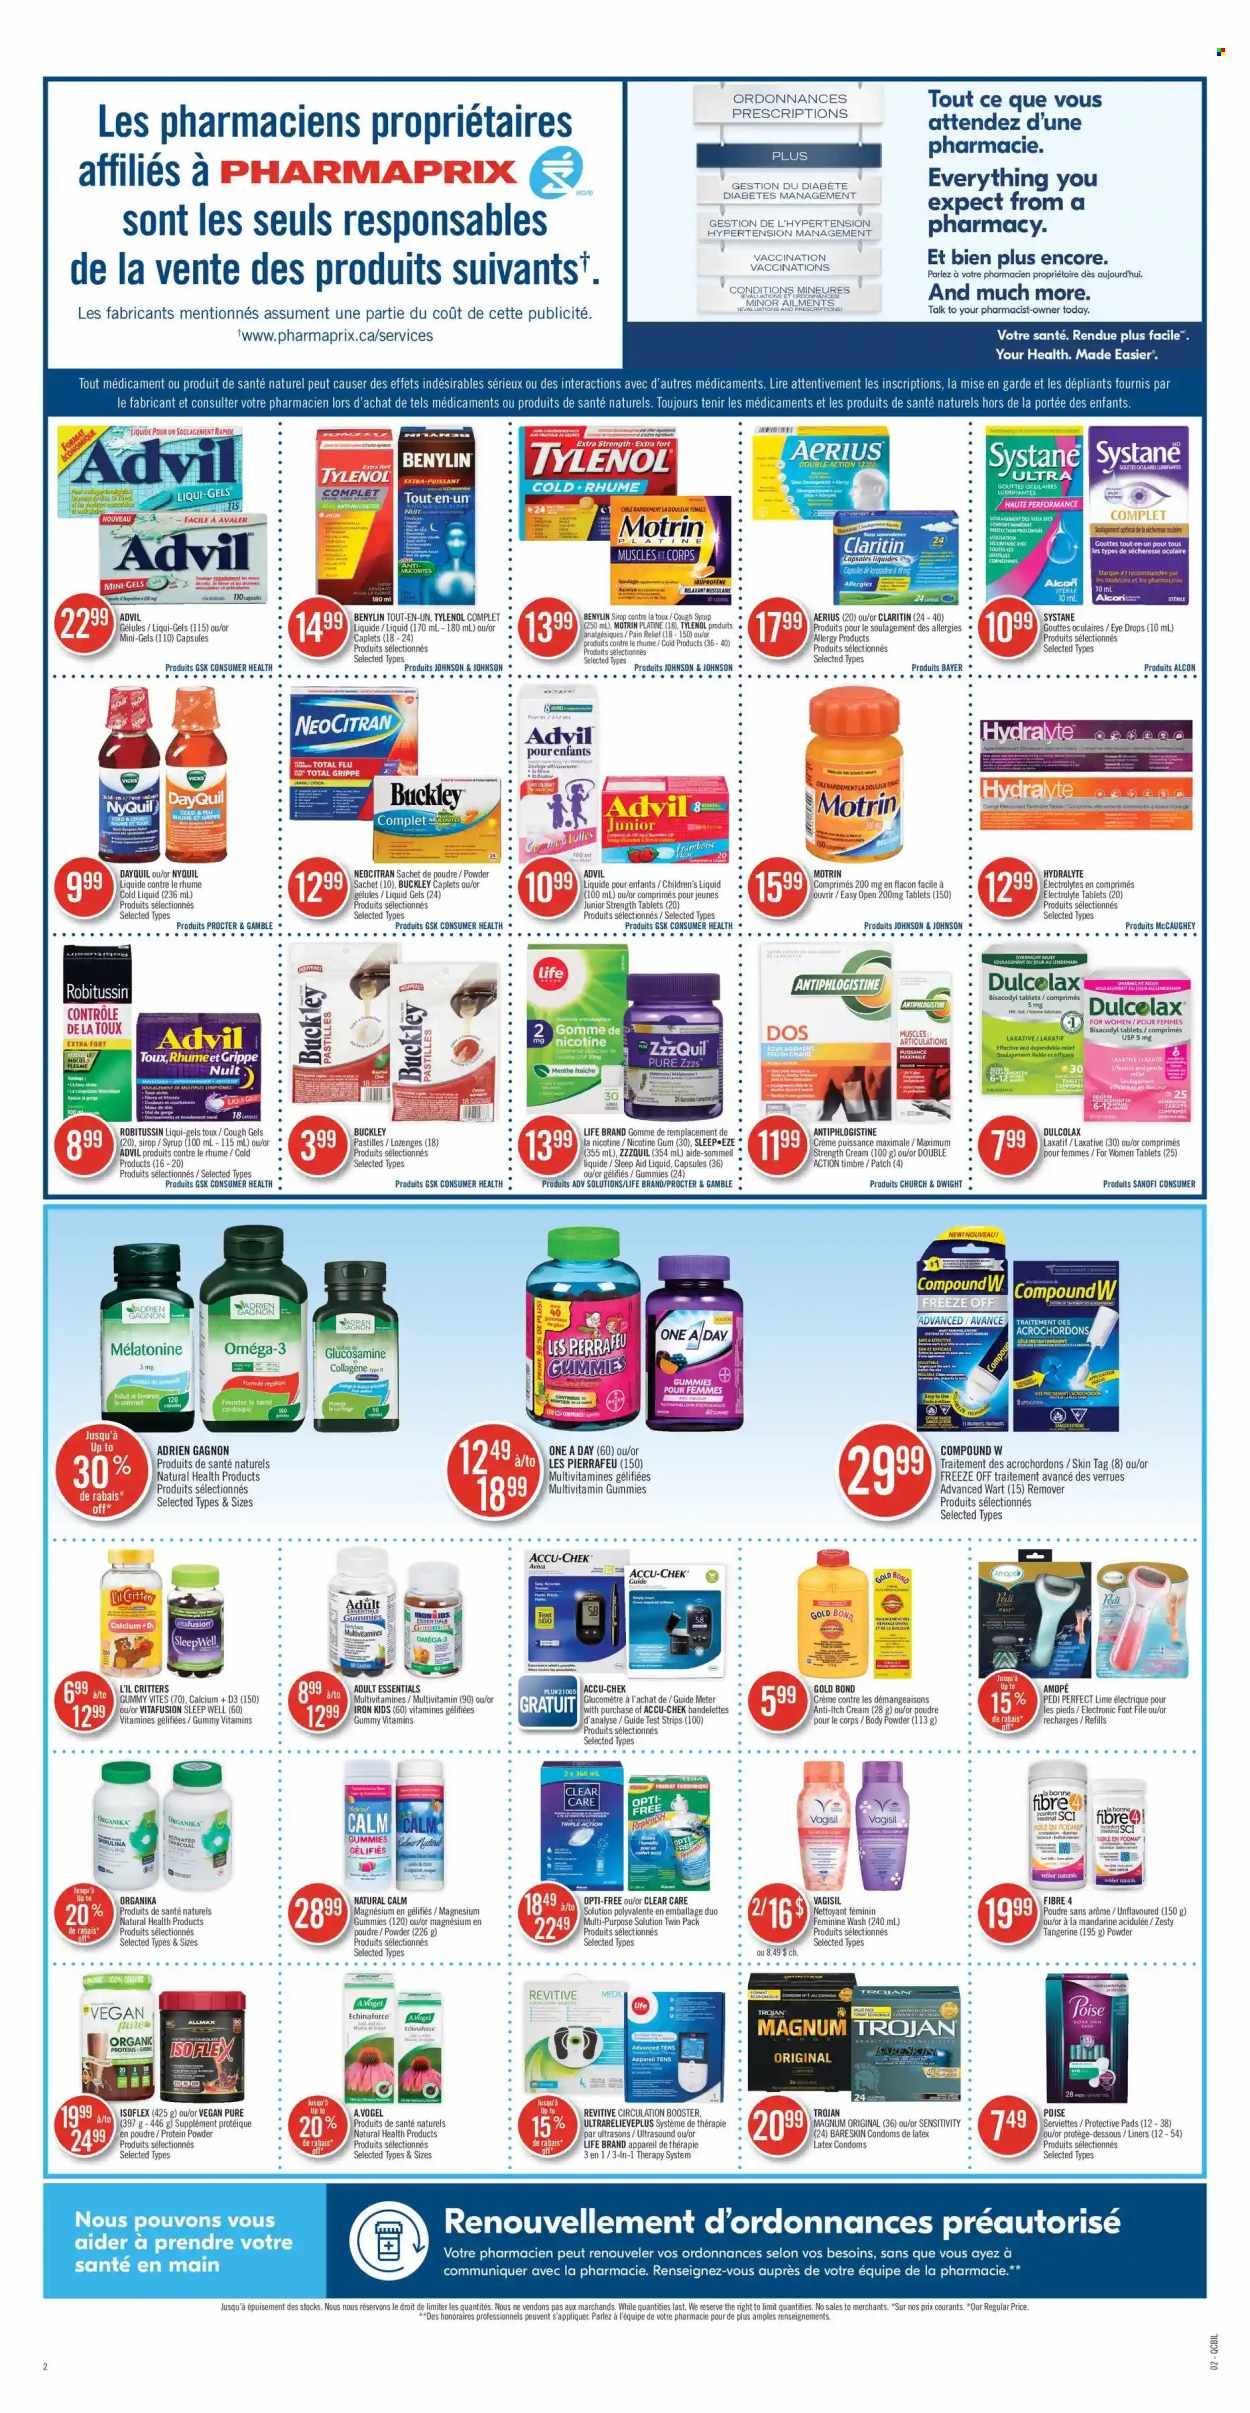 thumbnail - Pharmaprix Flyer - September 11, 2021 - September 16, 2021 - Sales products - Magnum, pastilles, syrup, Johnson's, condom, Vicks, iron, Revitive, pain relief, Clear Care, DayQuil, Dulcolax, glucosamine, magnesium, multivitamin, nicotine therapy, Tylenol, Vitafusion, ZzzQuil, NyQuil, Omega-3, eye drops, Advil Rapid, whey protein, Echinaforce, laxative, vitamin D3, Bayer, Benylin, Motrin, calcium, Robitussin, Systane. Page 2.